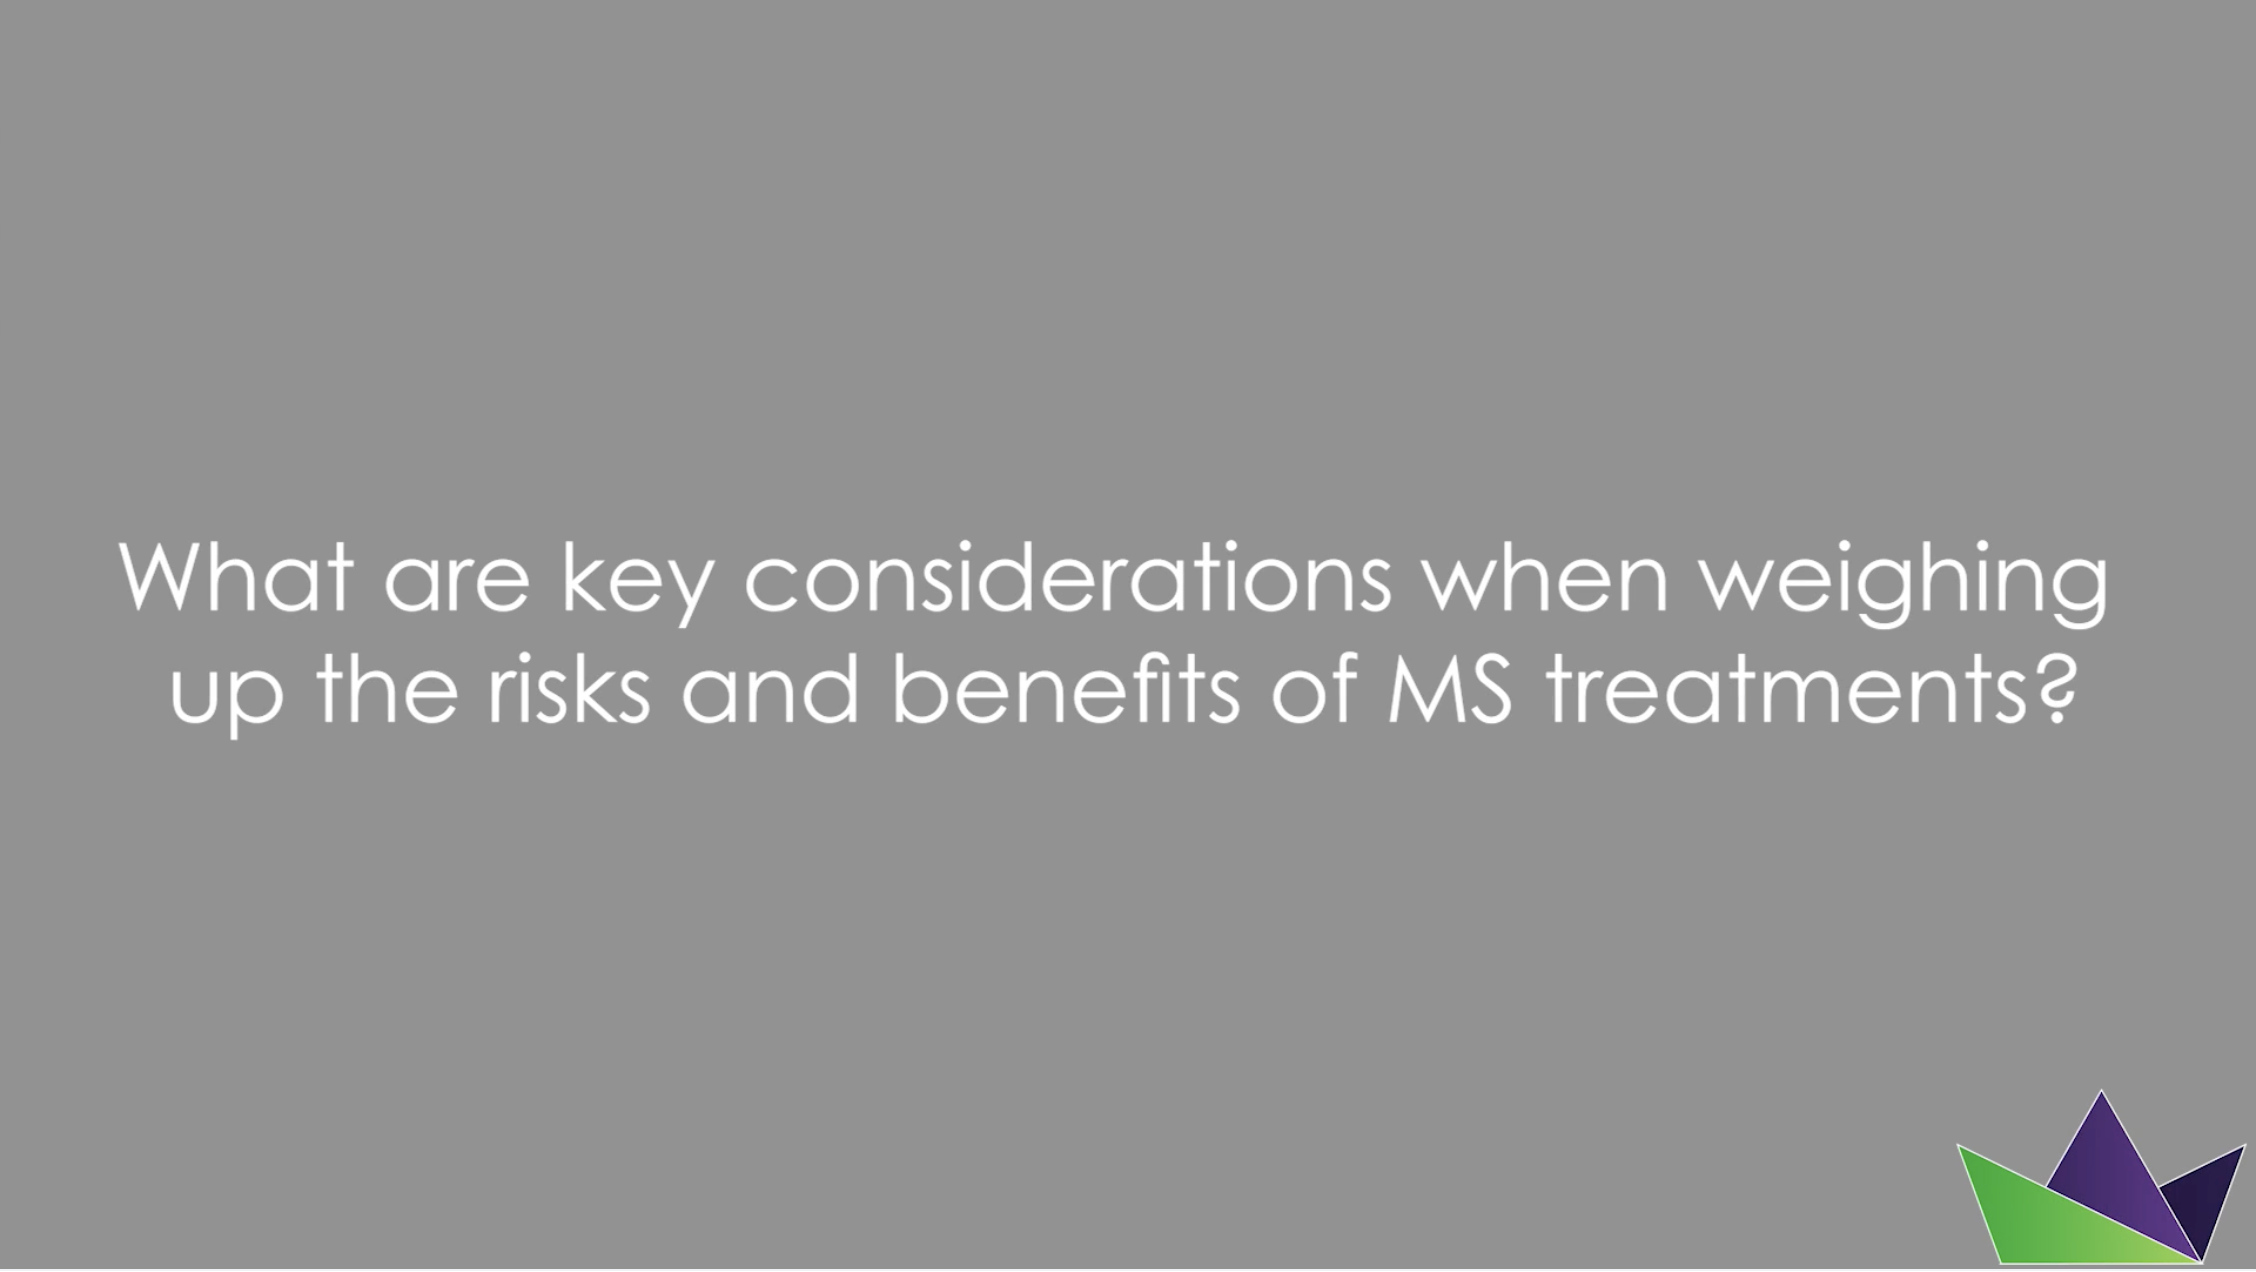 What are key considerations when weighing up the risks and benefits of MS treatments?